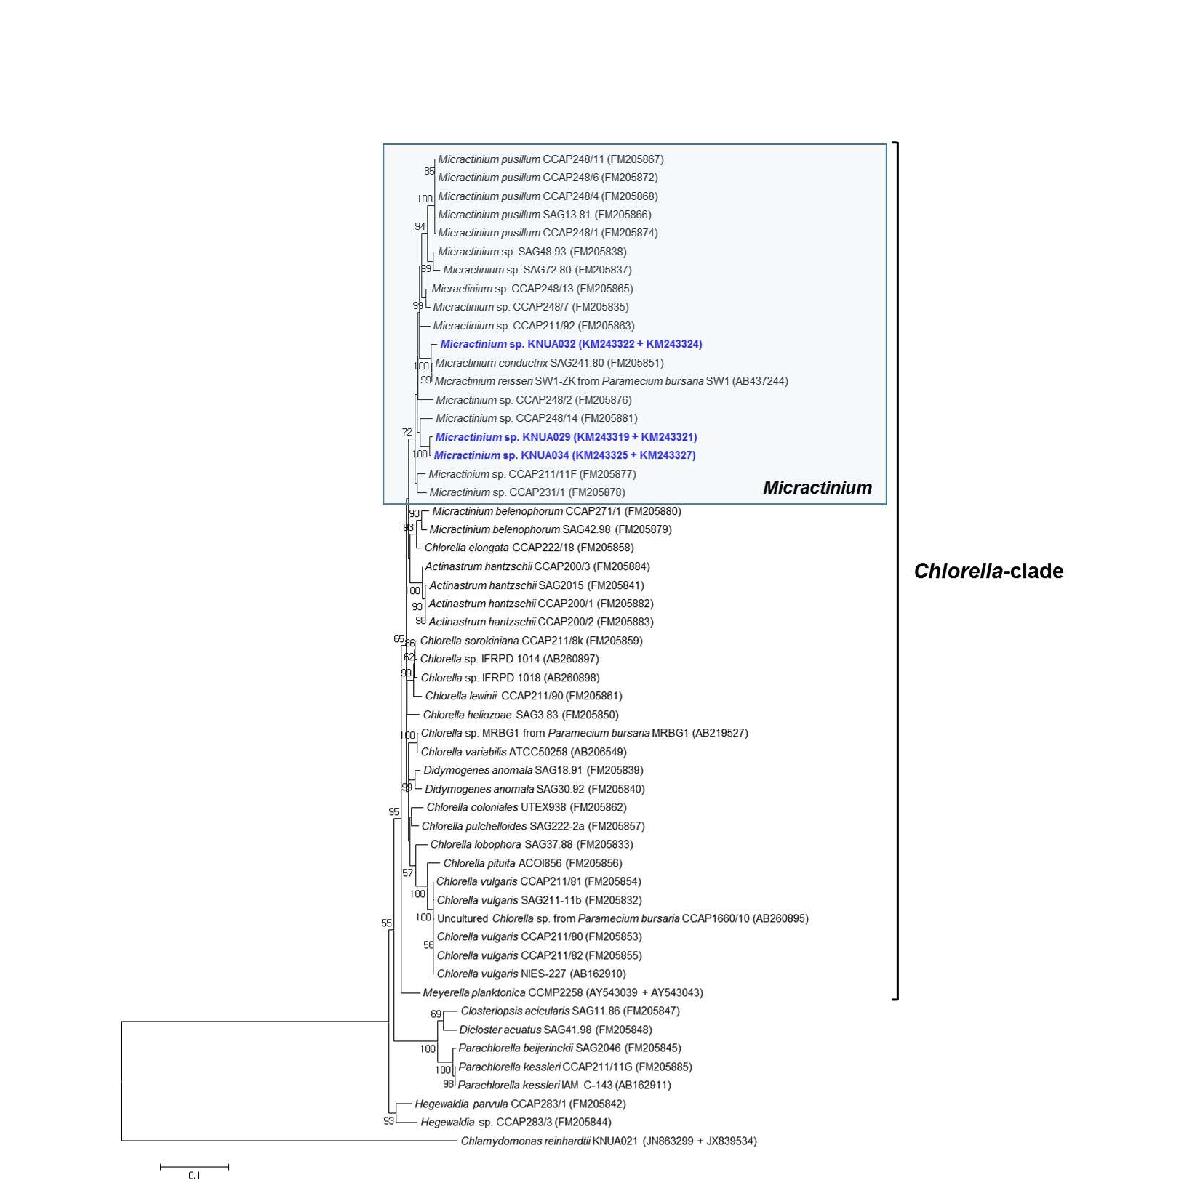 ML tree of the concatenated SSU rRNA and ITS sequences.